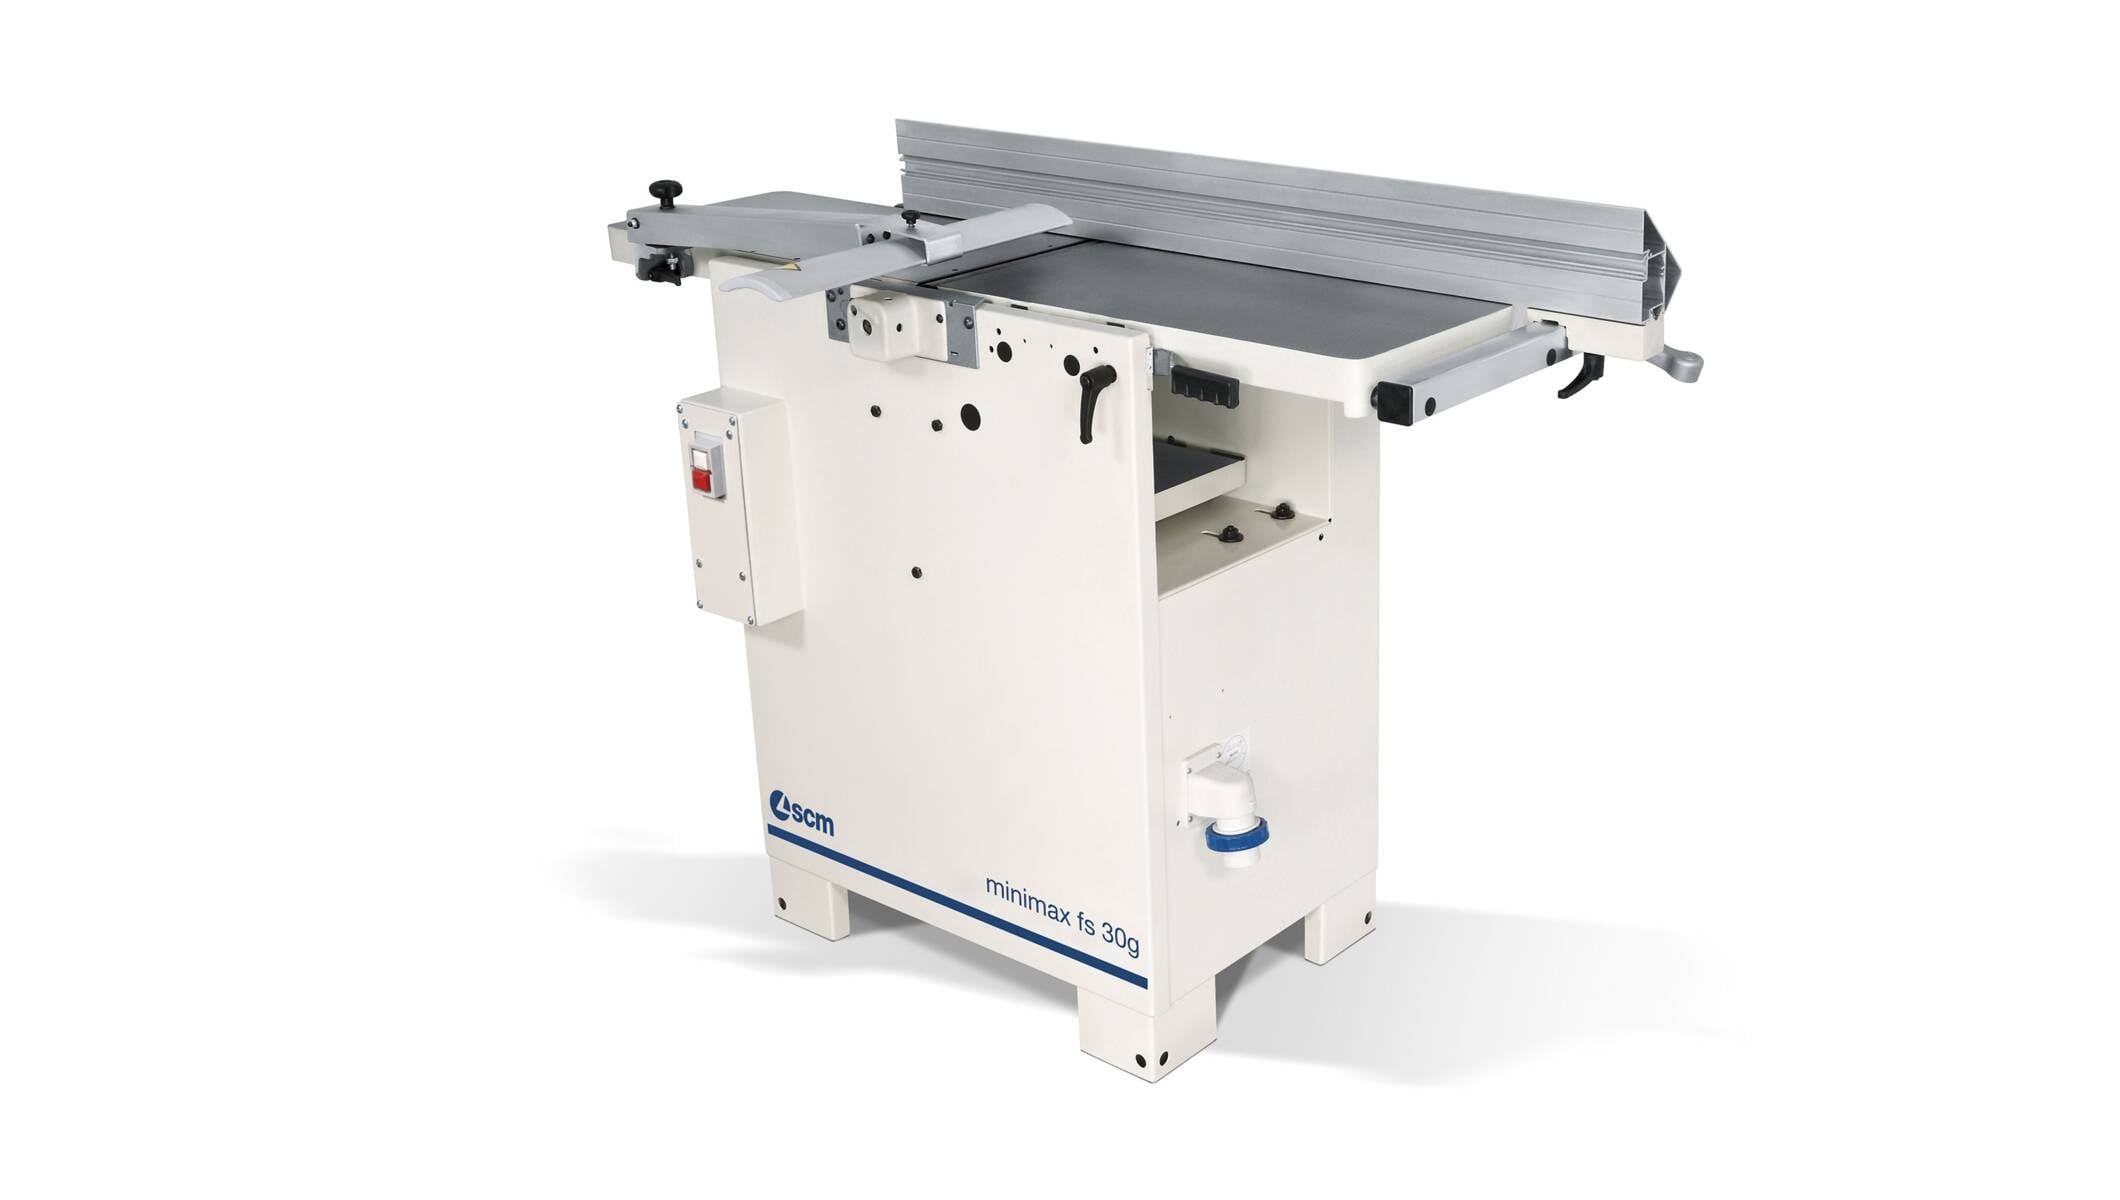 Joinery machines - Jointer/Planer Combination - minimax fs 30g